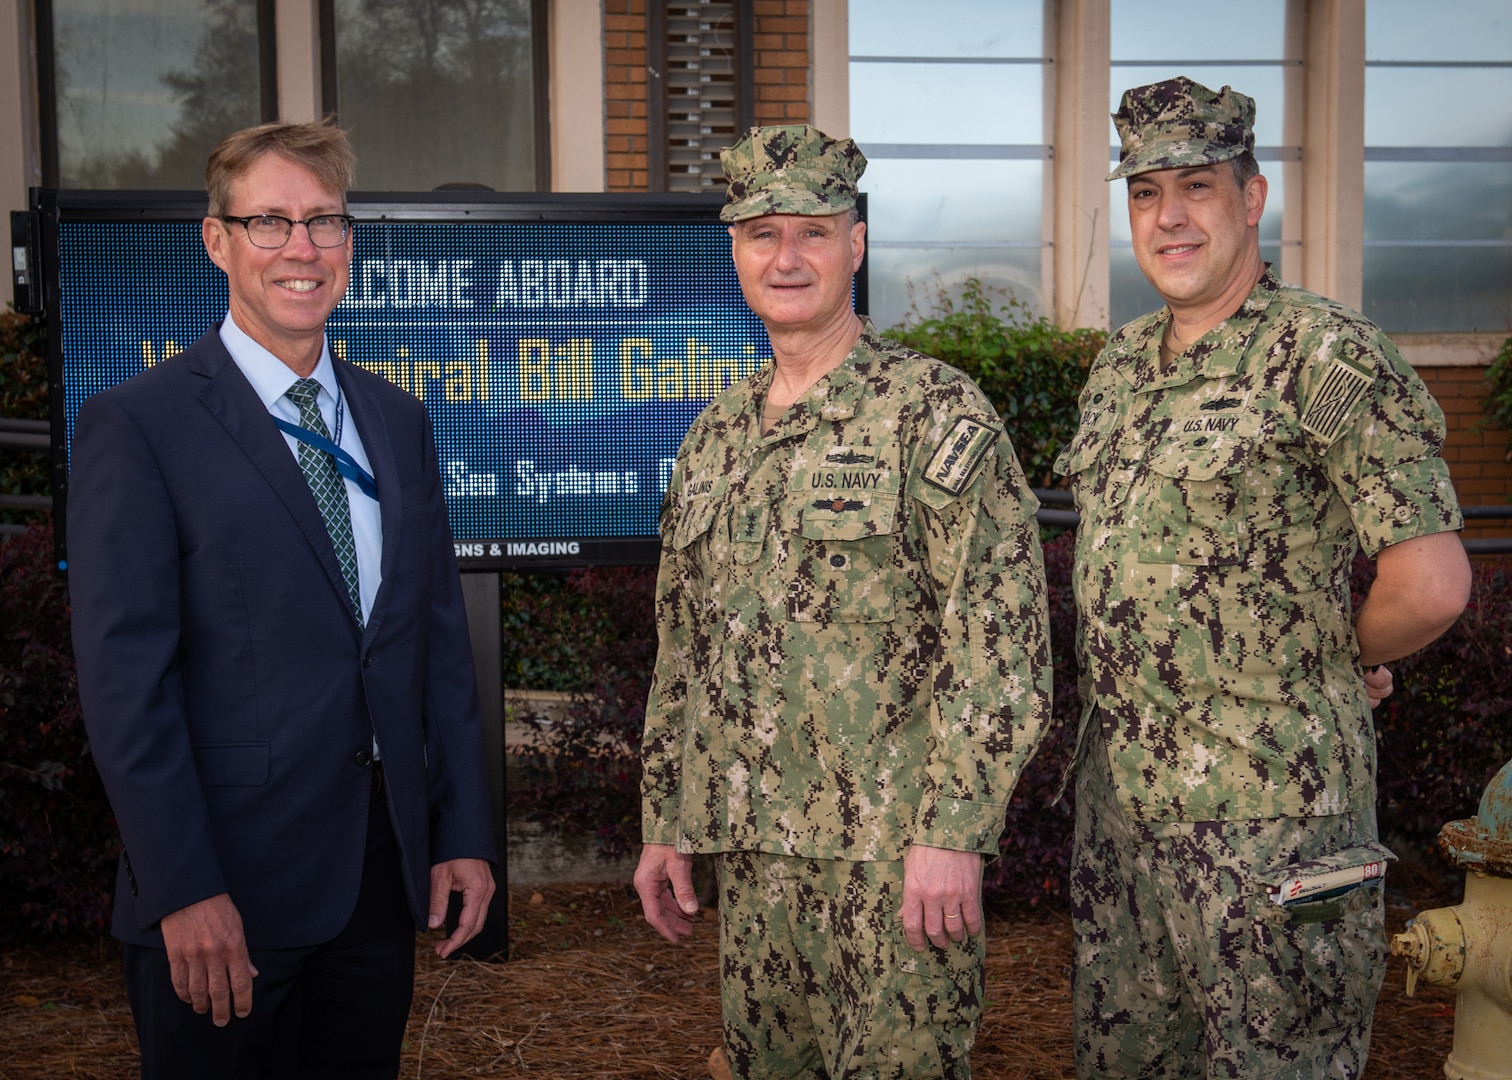 (left) Dr. Peter Adair, Naval Surface Warfare Center Panama City Division technical director, and (right) Capt. David Back, NSWC PCD commanding officer welcome Commander of Naval Sea Systems Command (NAVSEA), Vice Adm. Bill Galinis during his visit, March 30. Galinis experienced Panama City’s reputation as the home of military diving through presentations of diving systems NSWC PCD develops and supports for Naval Special Warfare, Explosive Ordnance Disposal, Specialized Research Diving Detachment, Special Operations Command, and Navy Diving. (U.S. Navy photo by Eddie Green)